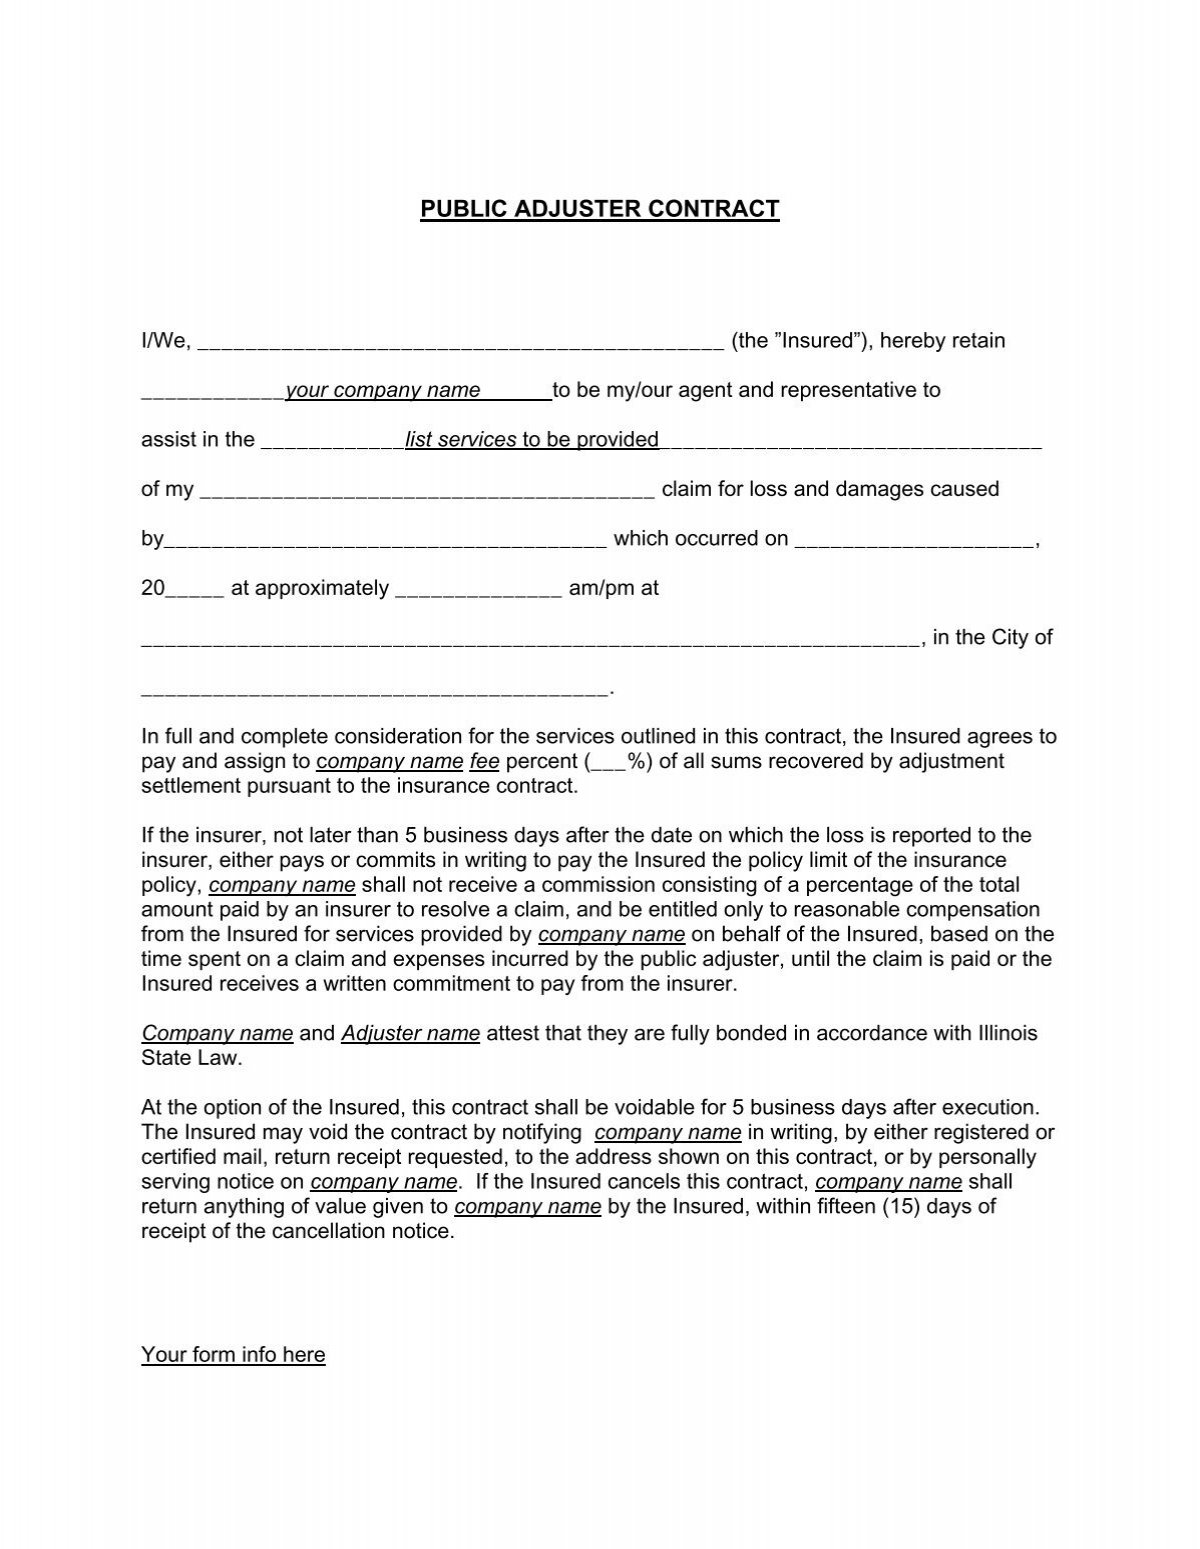 Public Adjuster Contract Form Illinois Department of Insurance